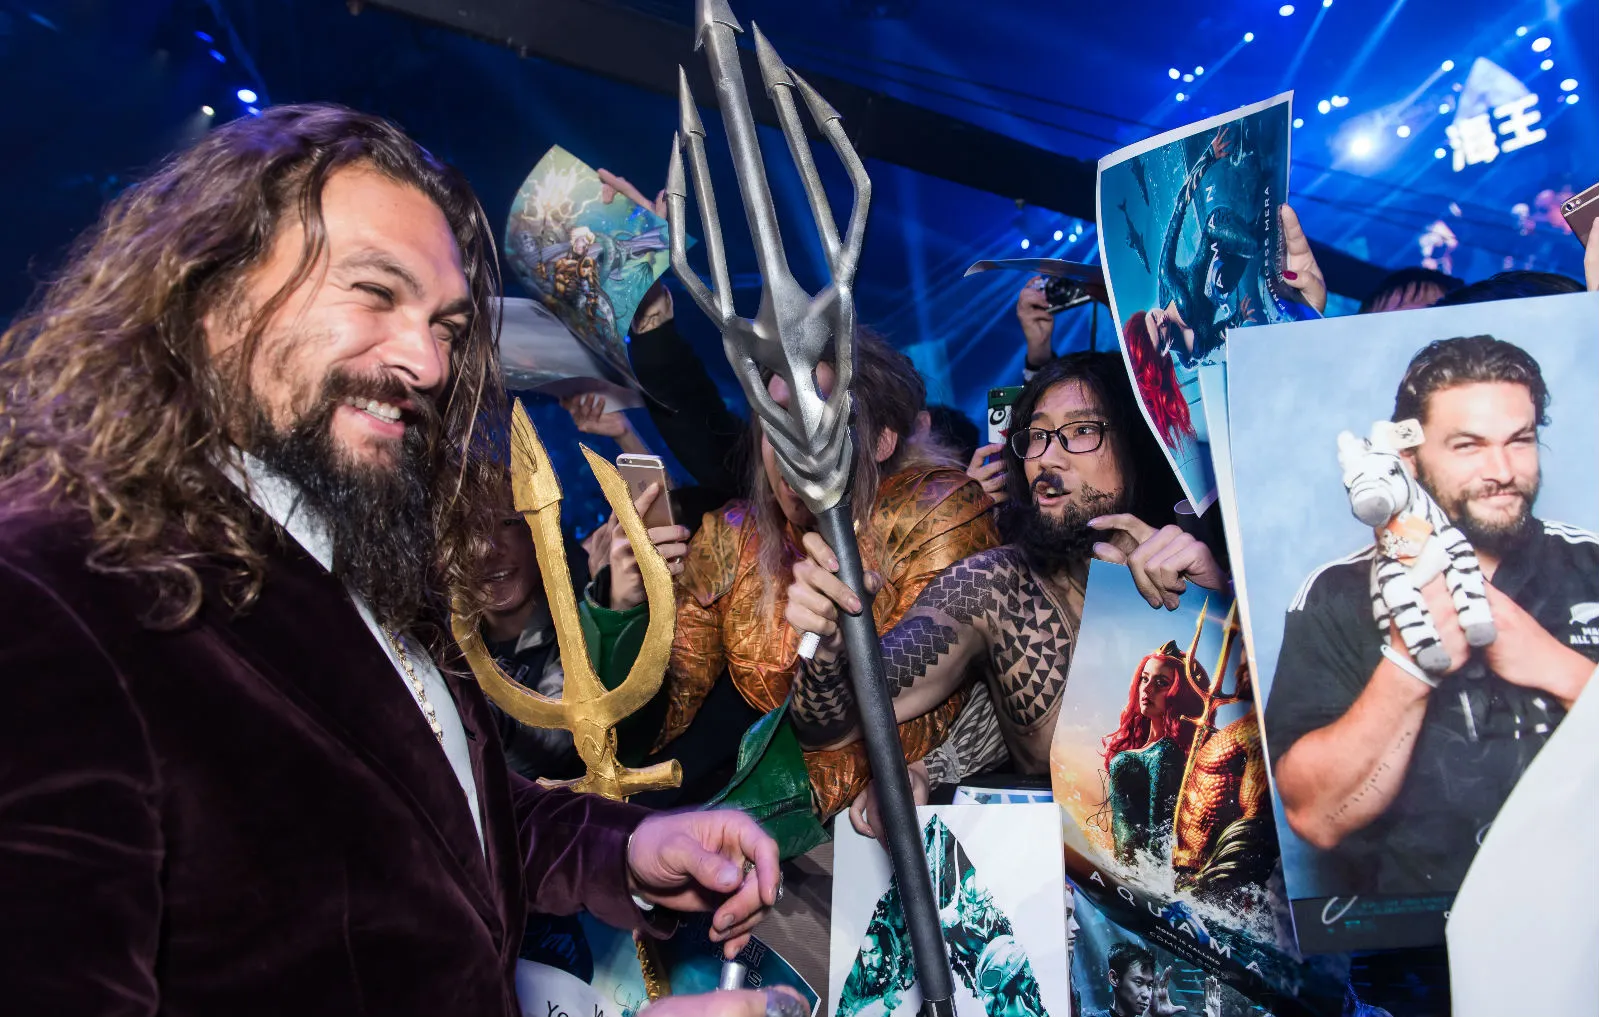 Jason poses with fans dressed as Aquaman. JPG